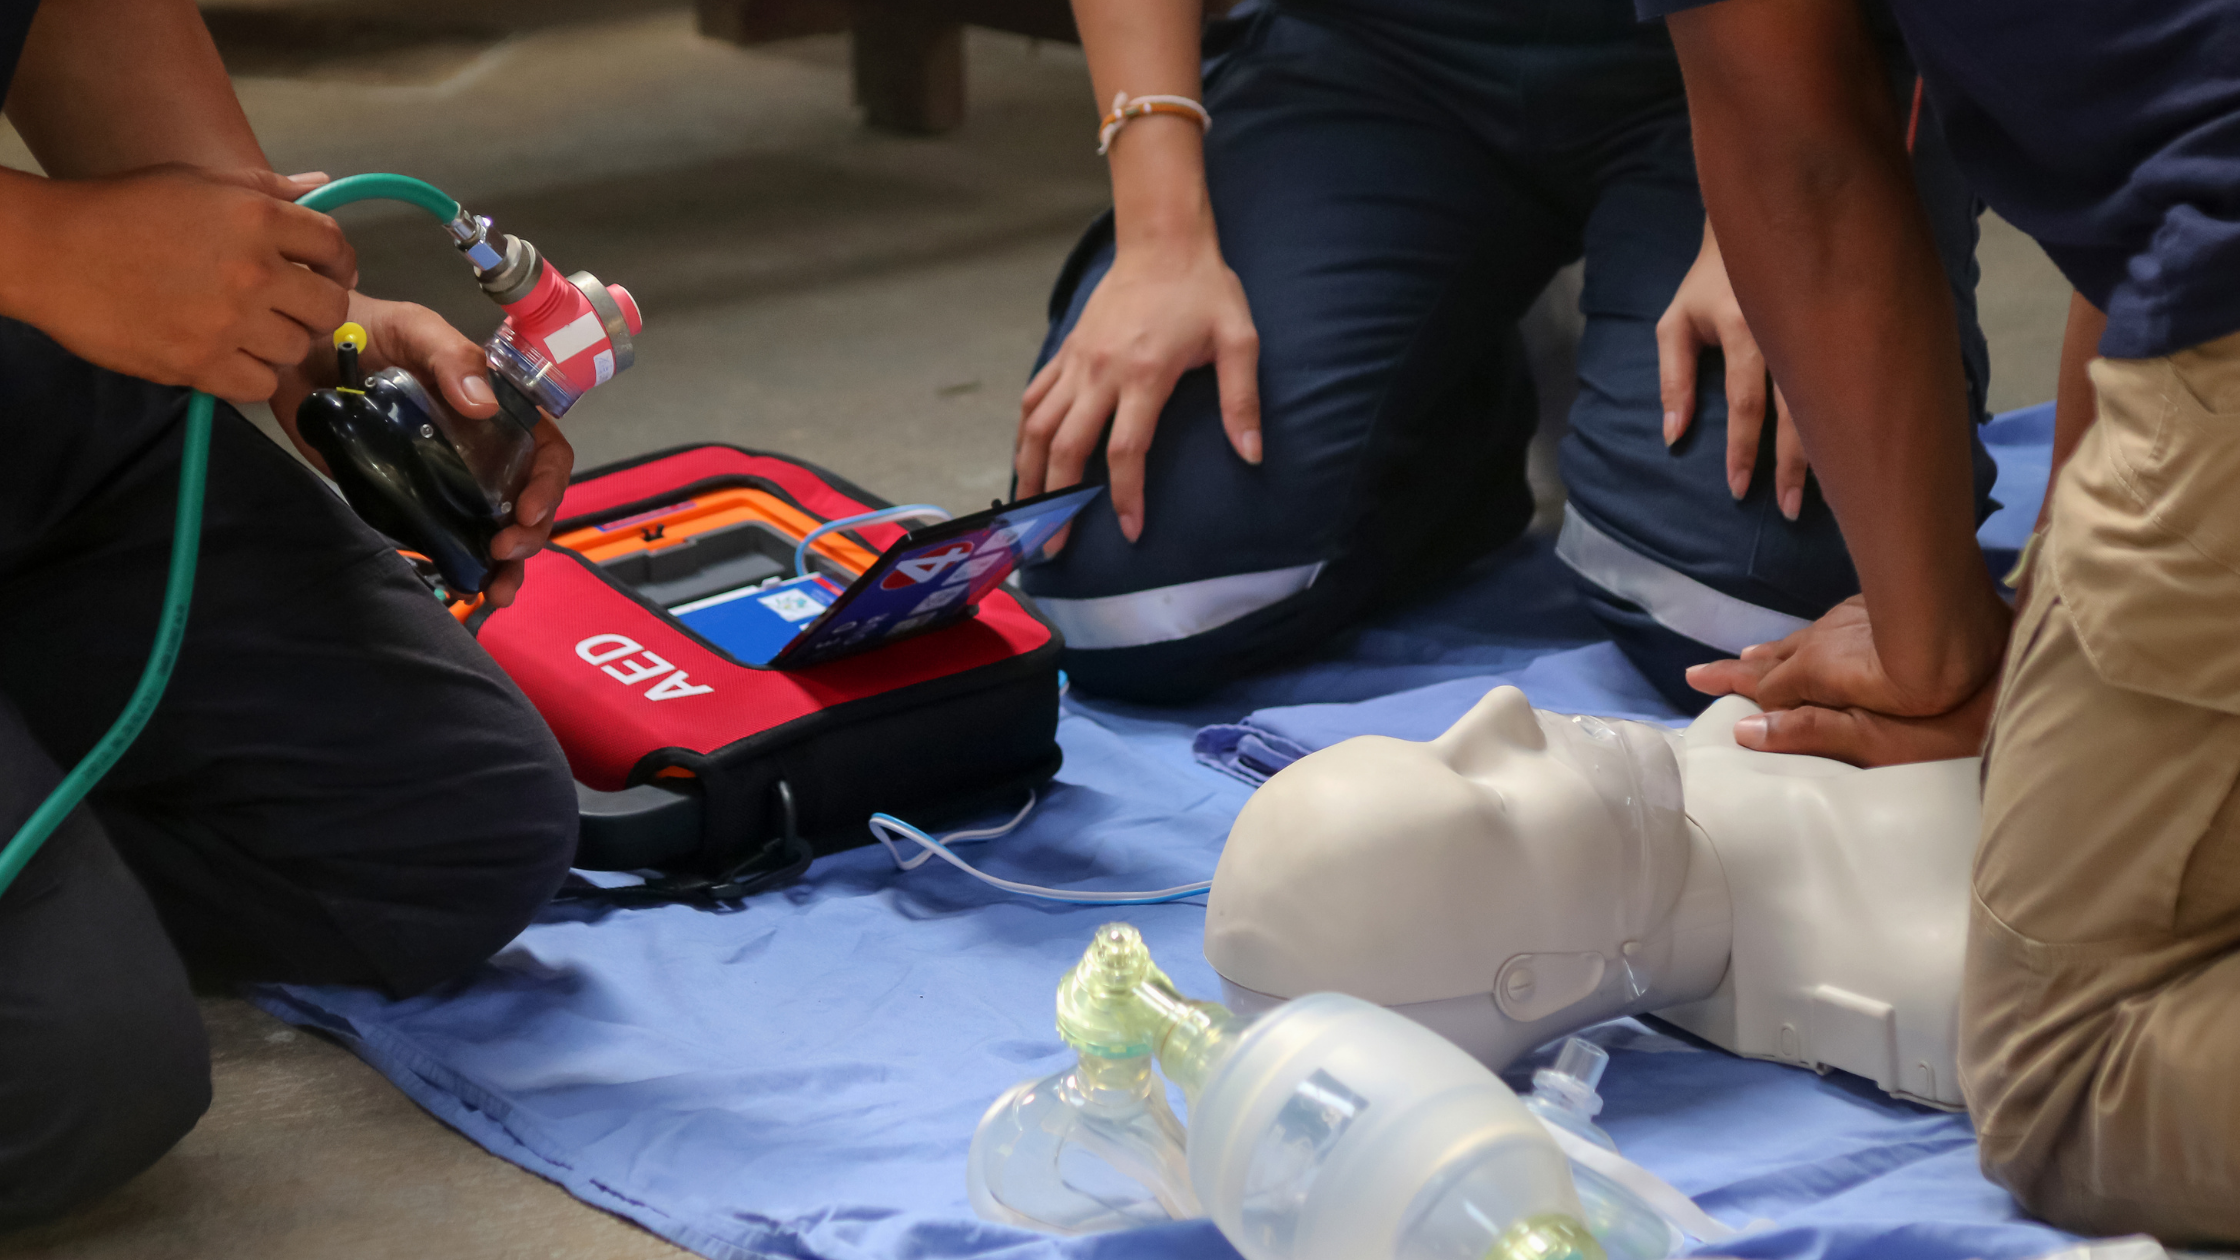 Vancouver Emergency Childcare First Aid Course - CPR